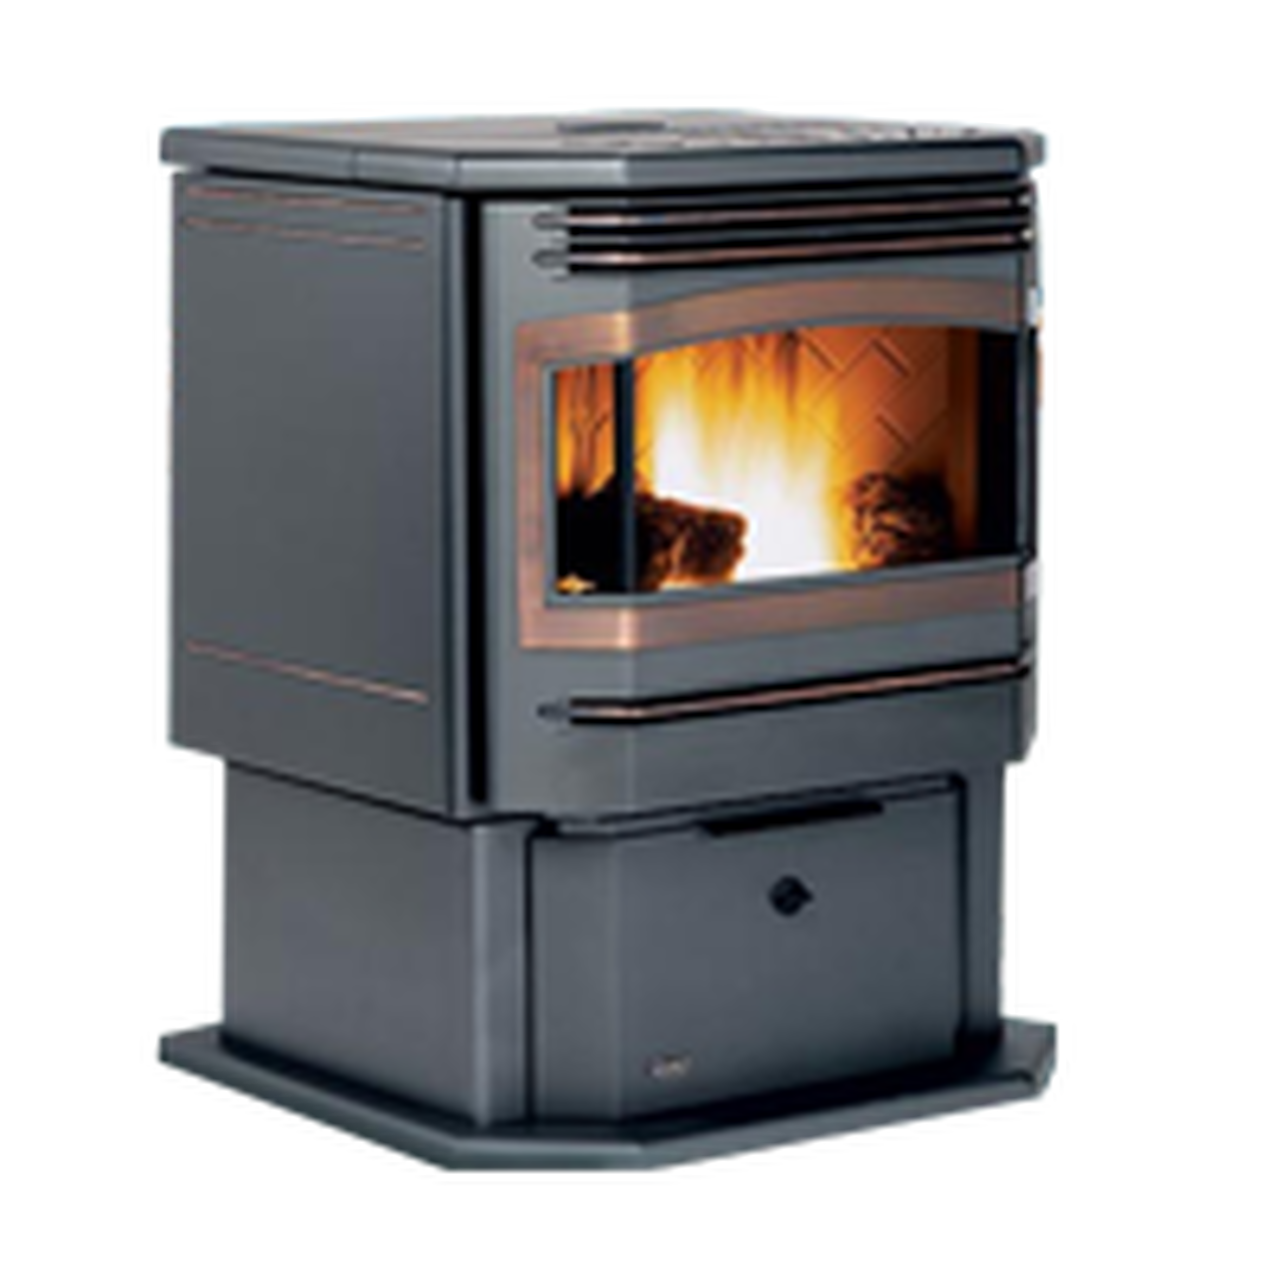 Superior Gas Fireplace Parts Beautiful Enviro Meridian Pellet Stove Parts Free Shipping On orders